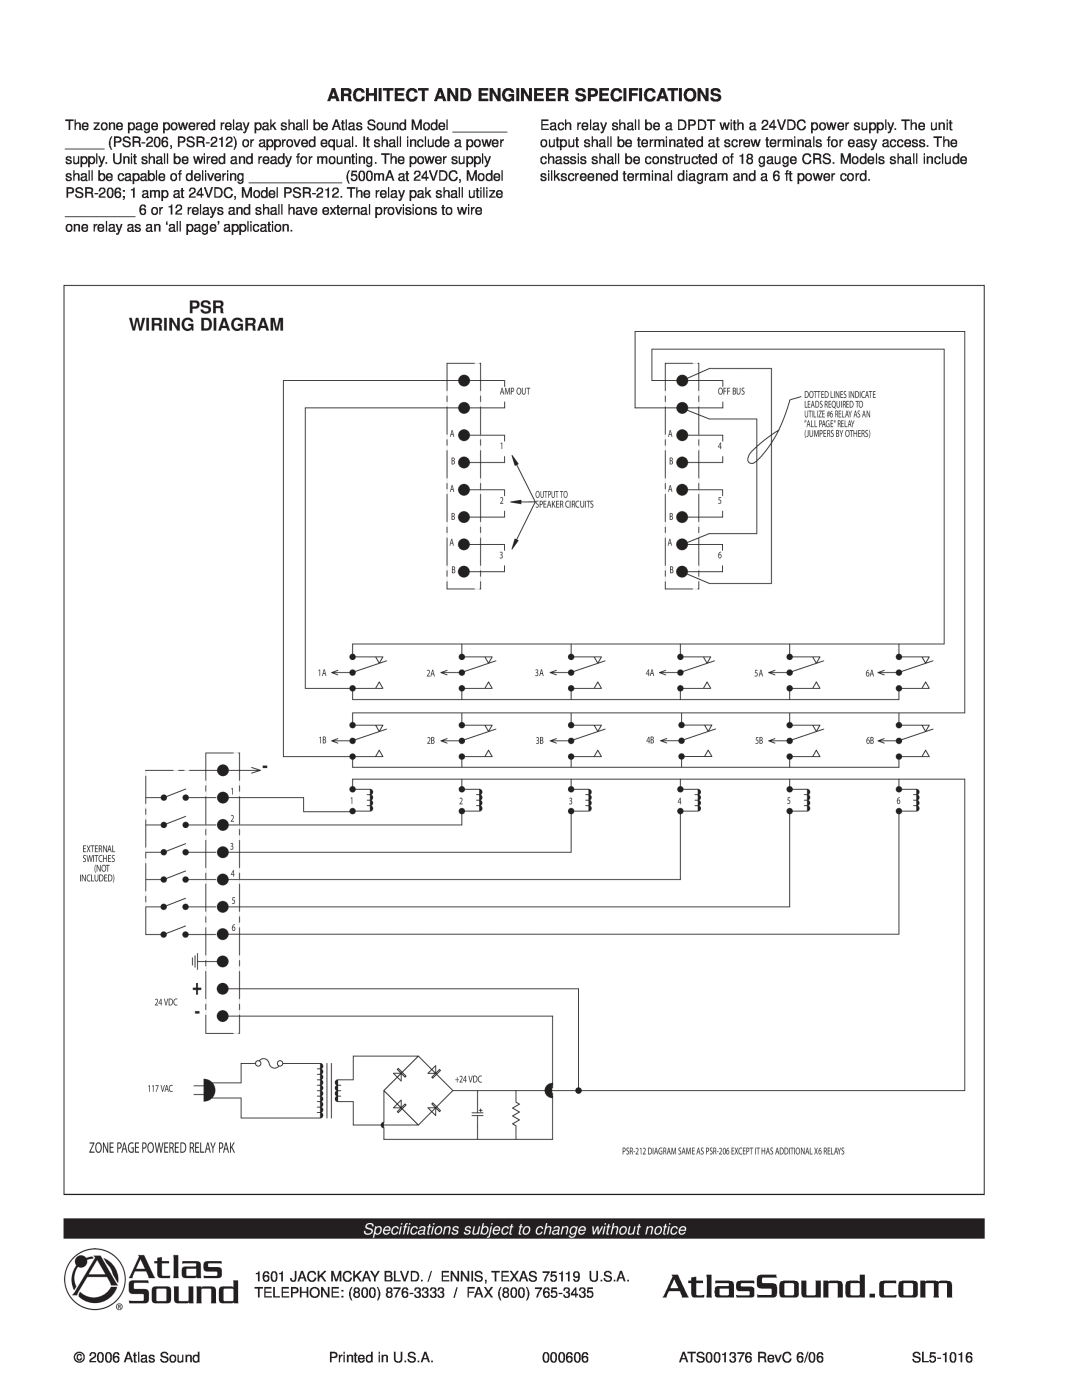 Atlas Sound PSR-212, PSR-206 Architect And Engineer Specifications, Psr Wiring Diagram, Zone Page Powered Relay Pak 